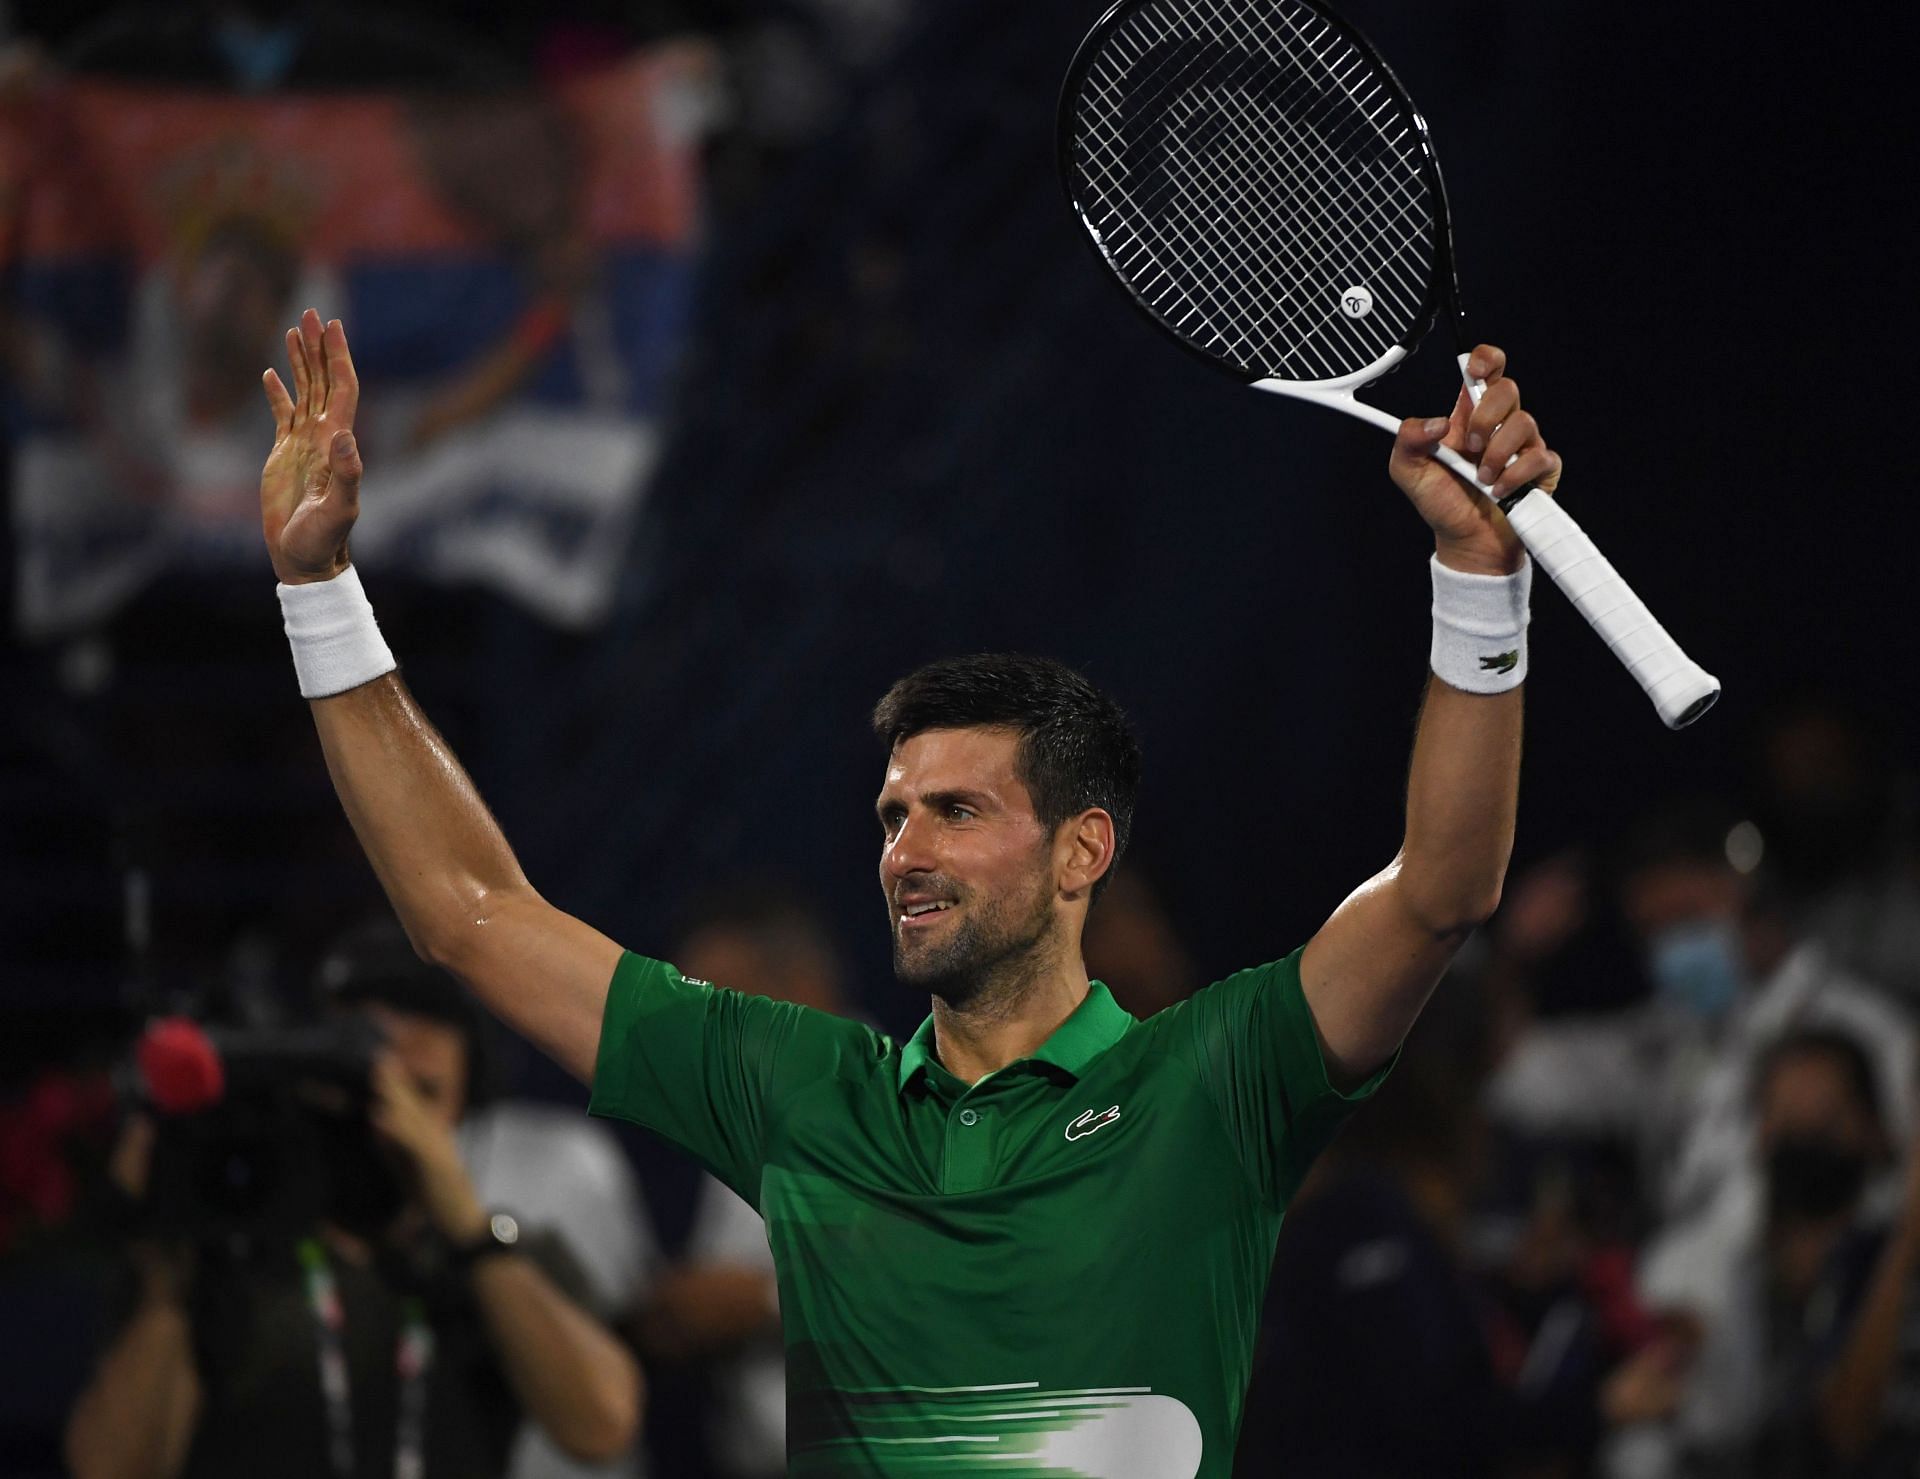 Novak Djokovic completes a whopping 7 years as World No. 1